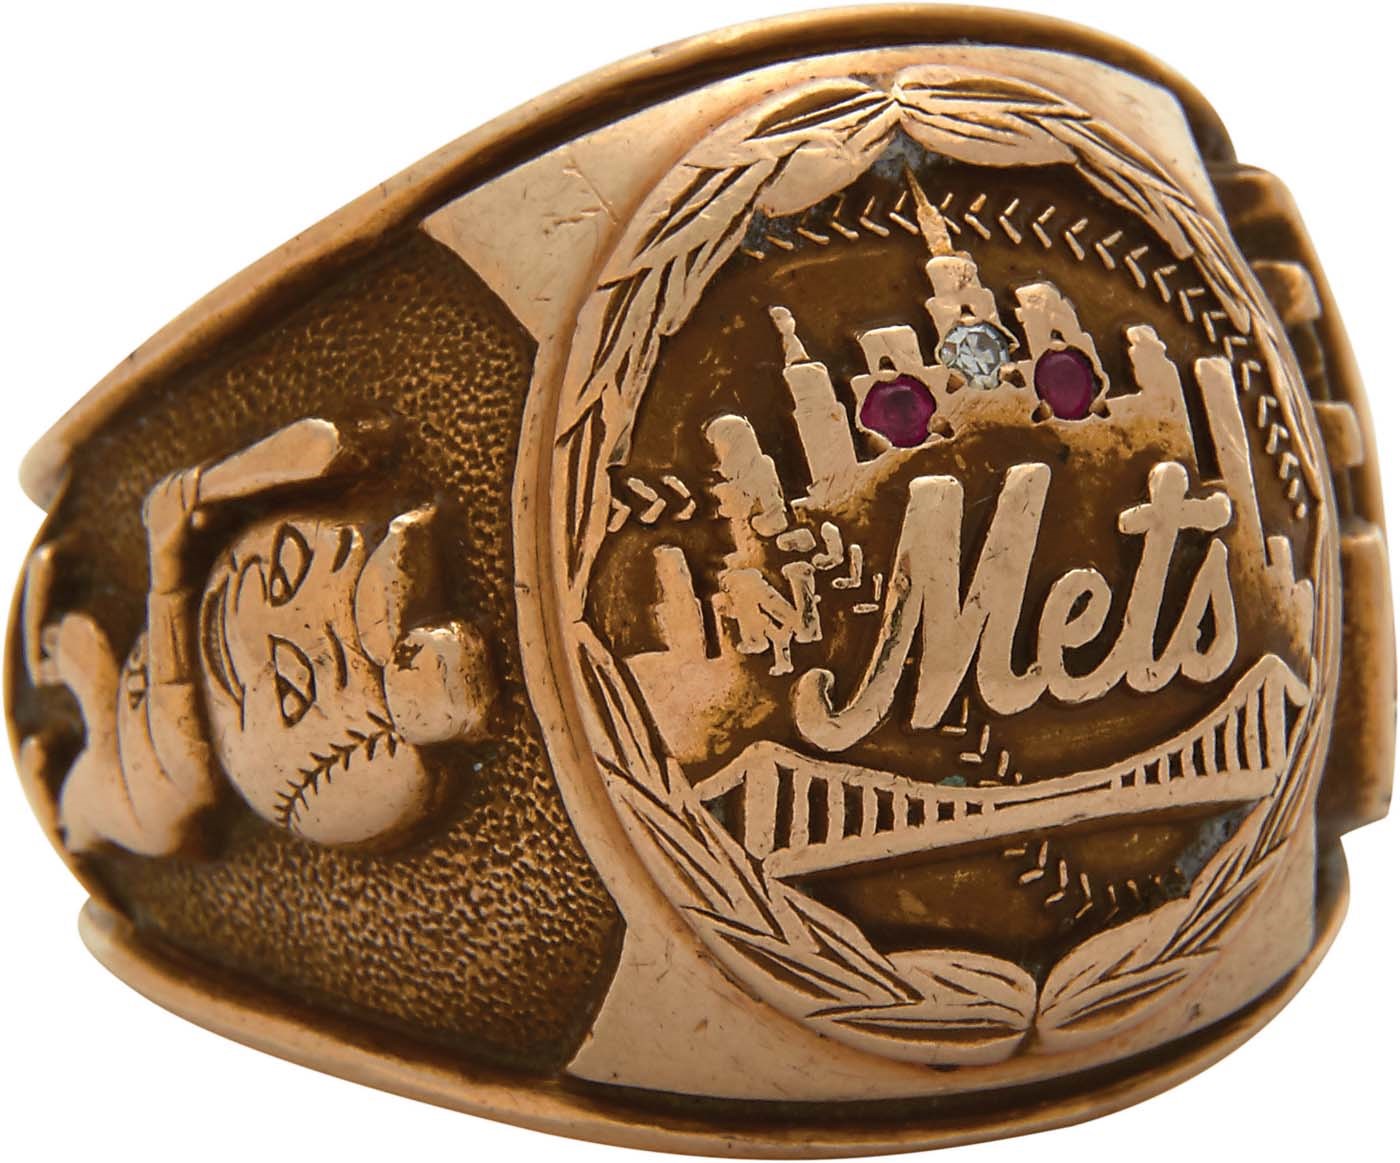 Sports Rings And Awards - 1960s New York Mets 10k Gold Team Ring Presented to NY Sports Writer (Family LOA)